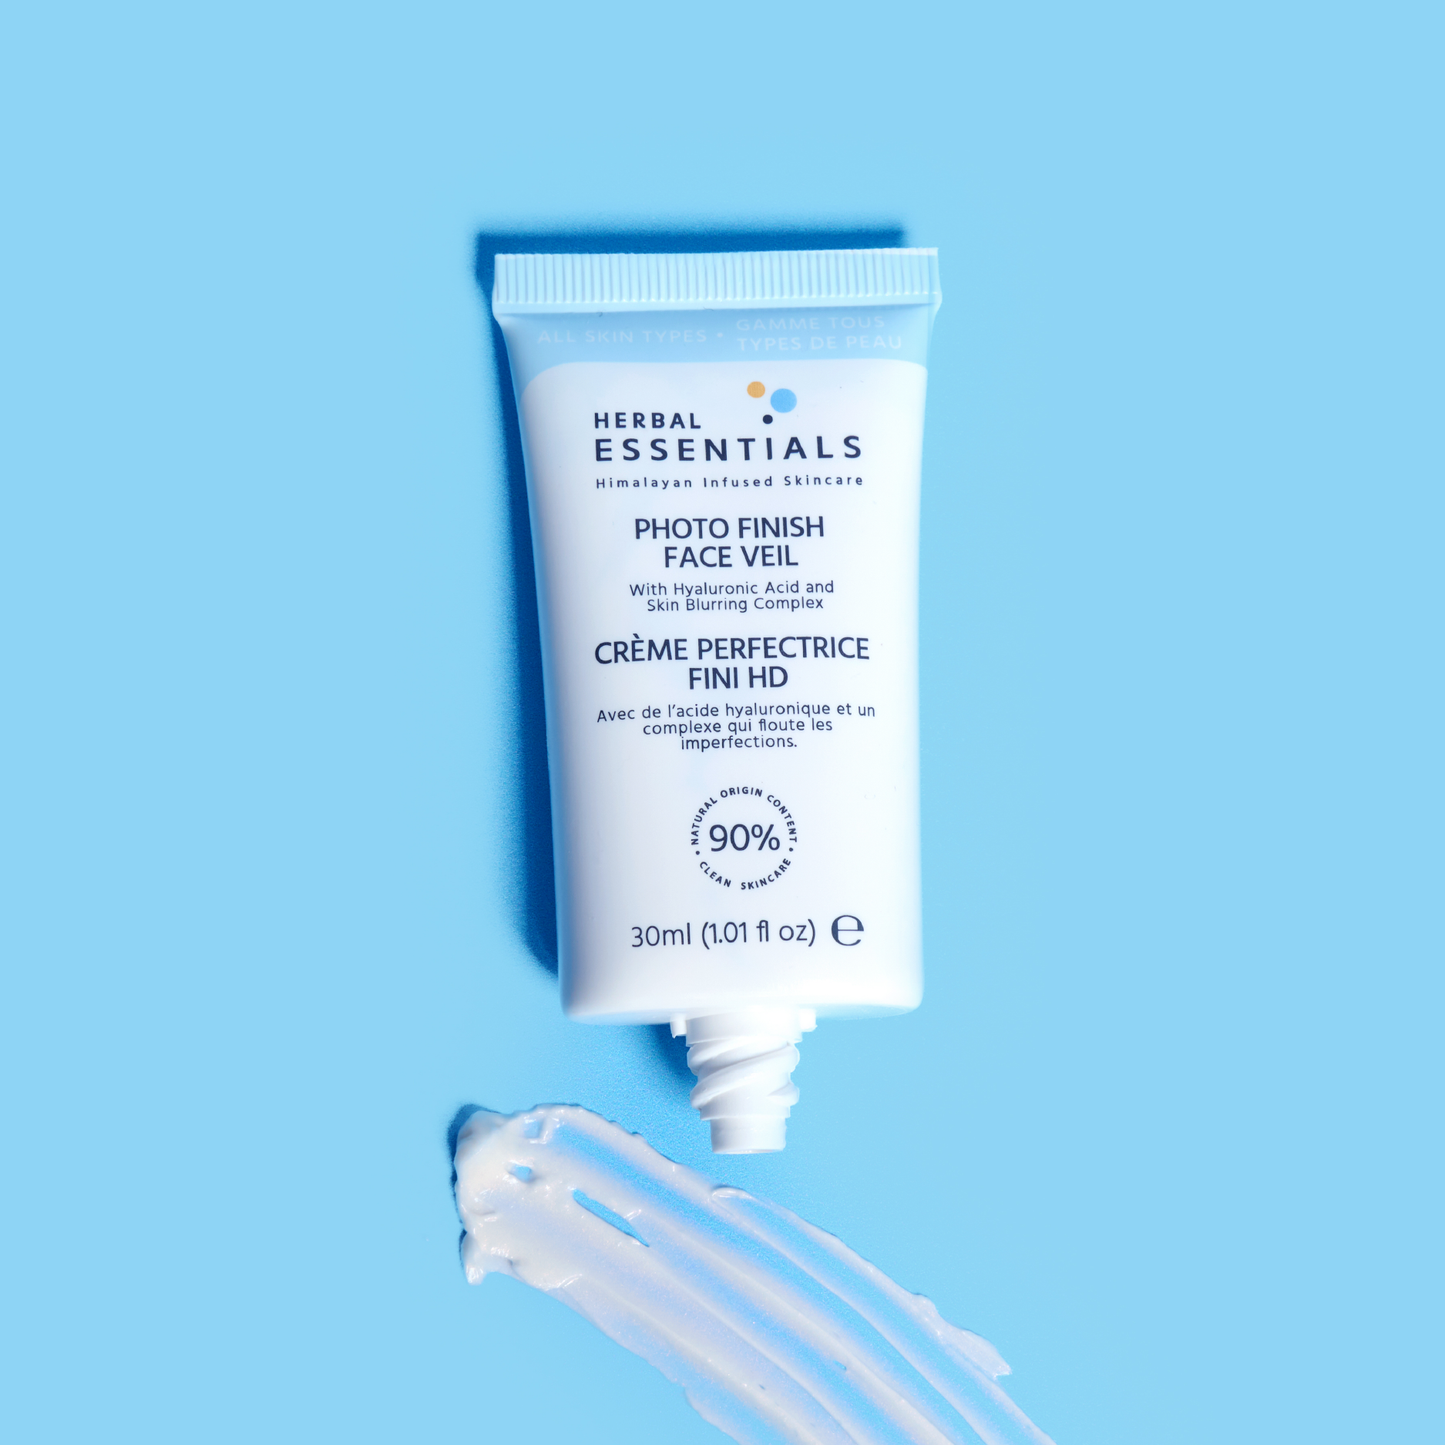 Herbal Essentials Photo Finish Face Veil with Hyaluronic Acid and Skin Blurring Complex